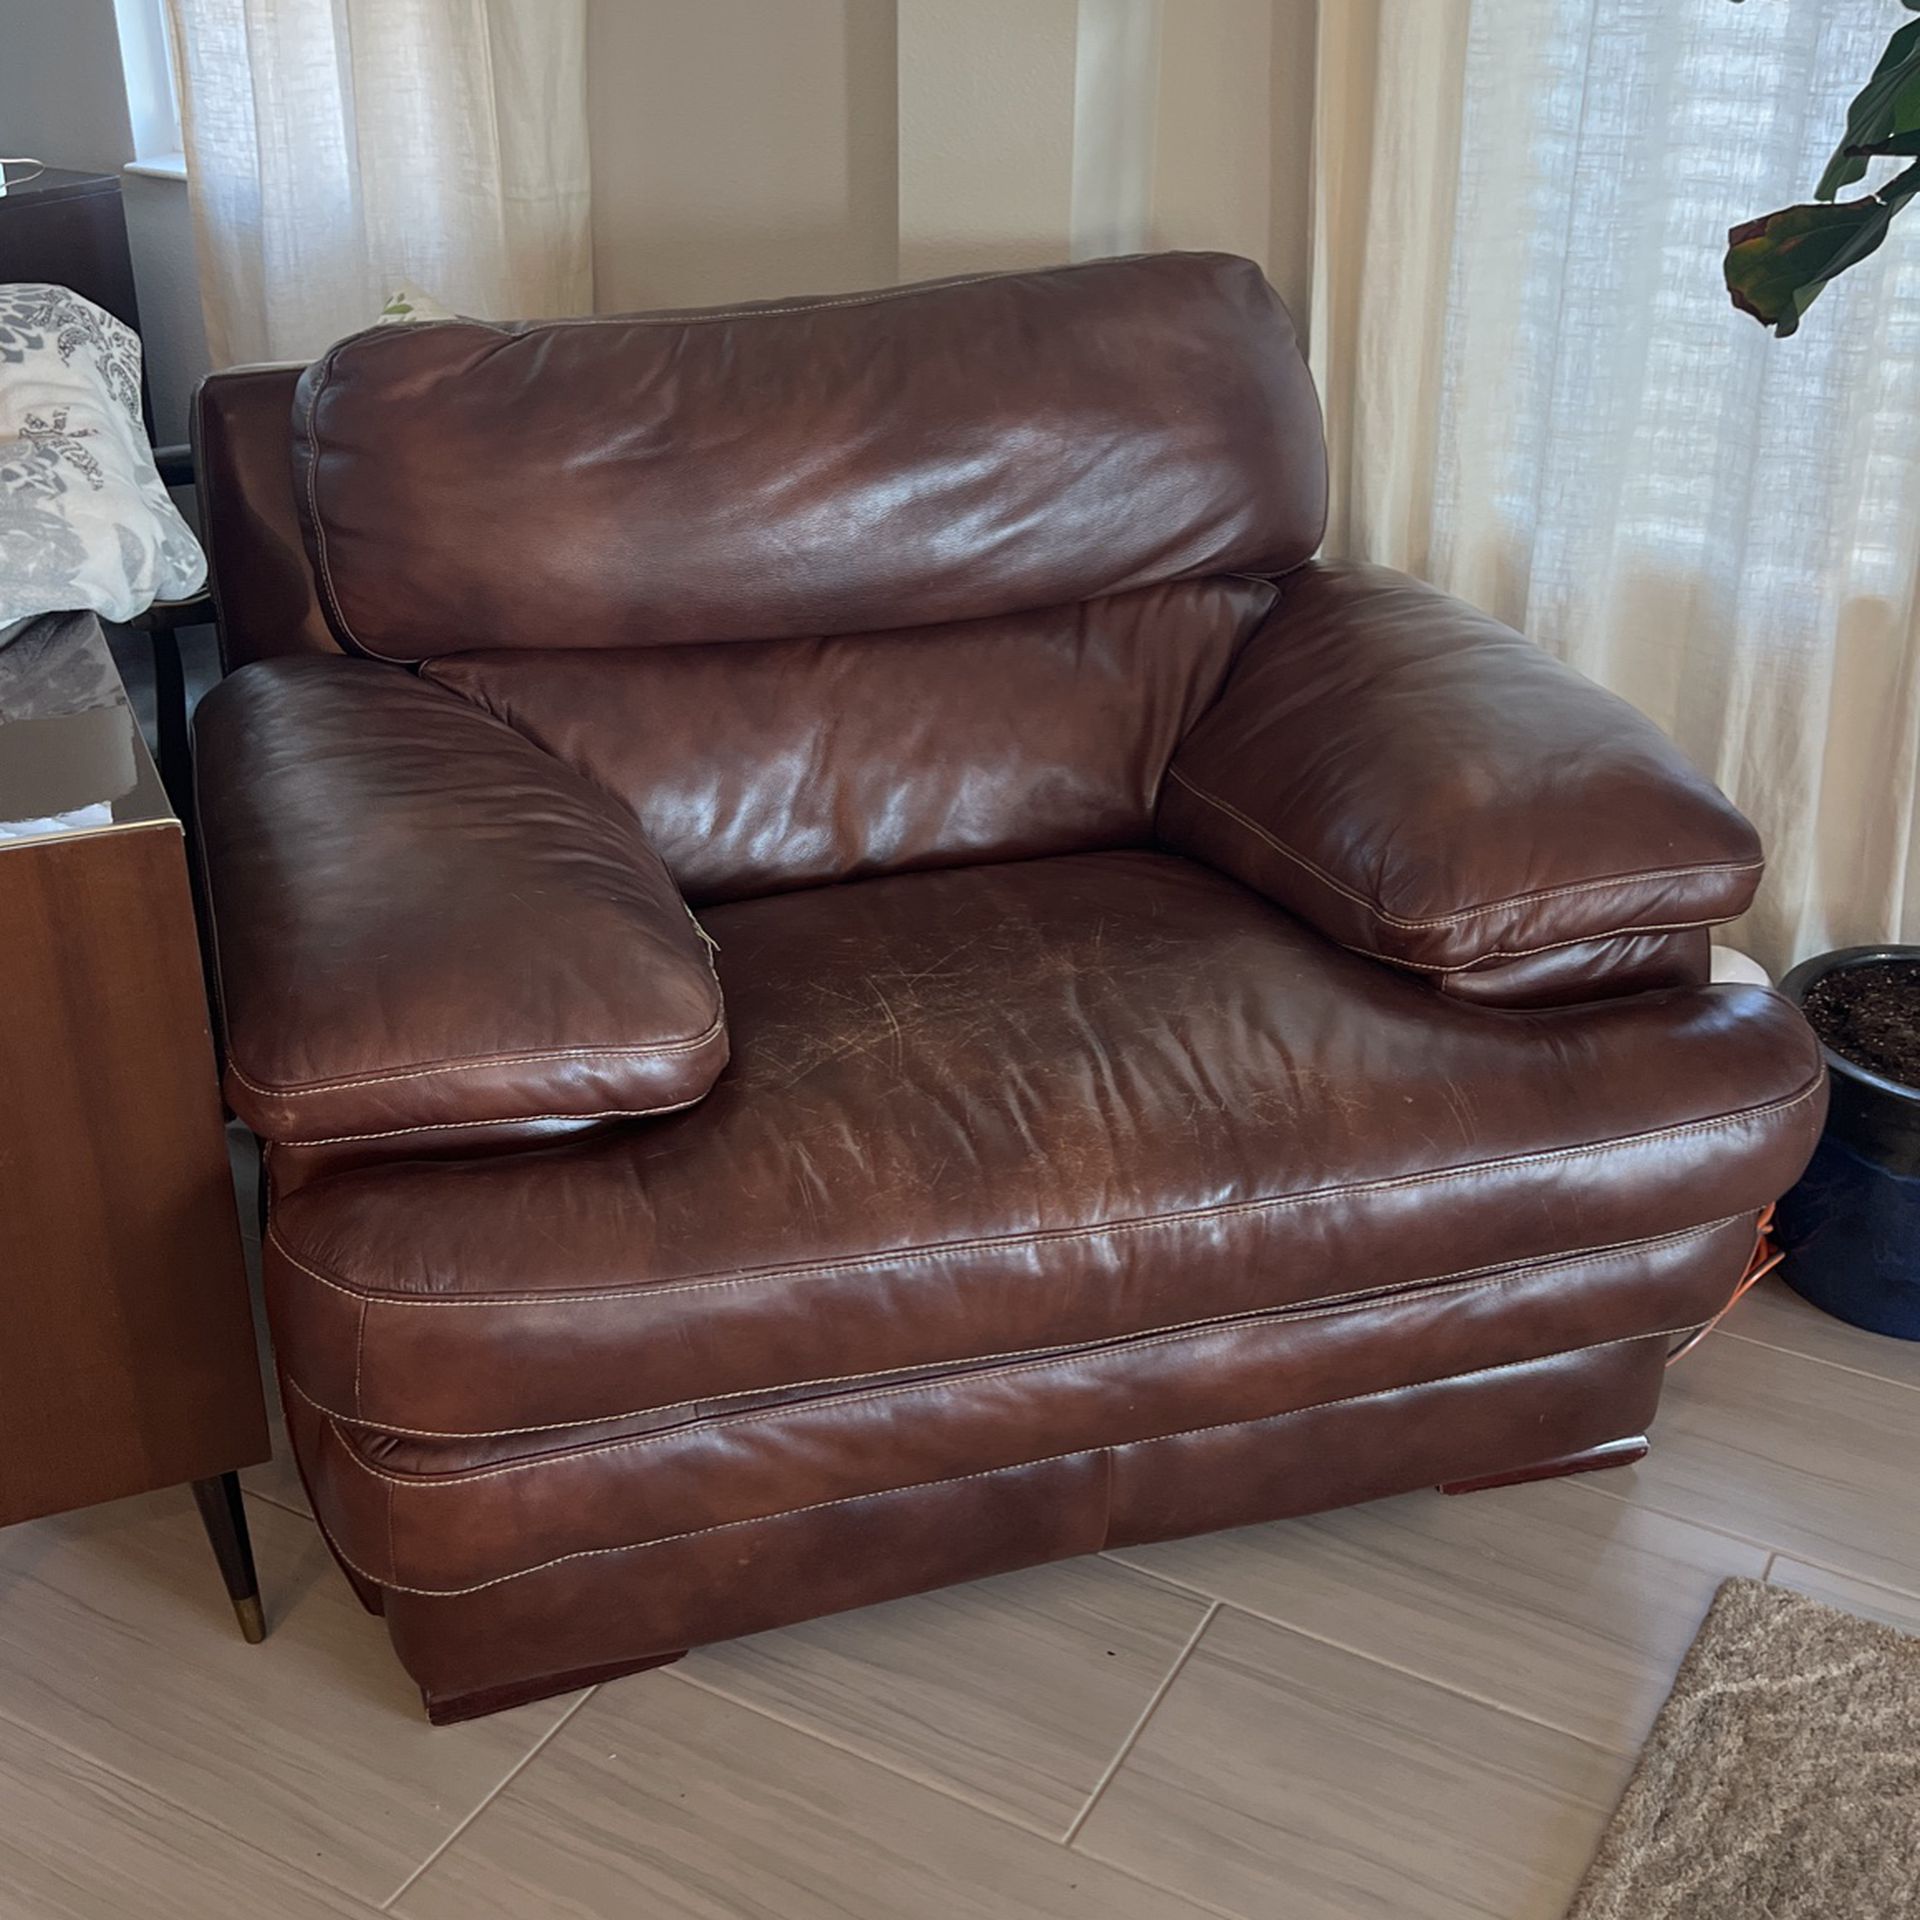 Genuine Leather Couch Loveseat And Chair-MUST GO TODAY